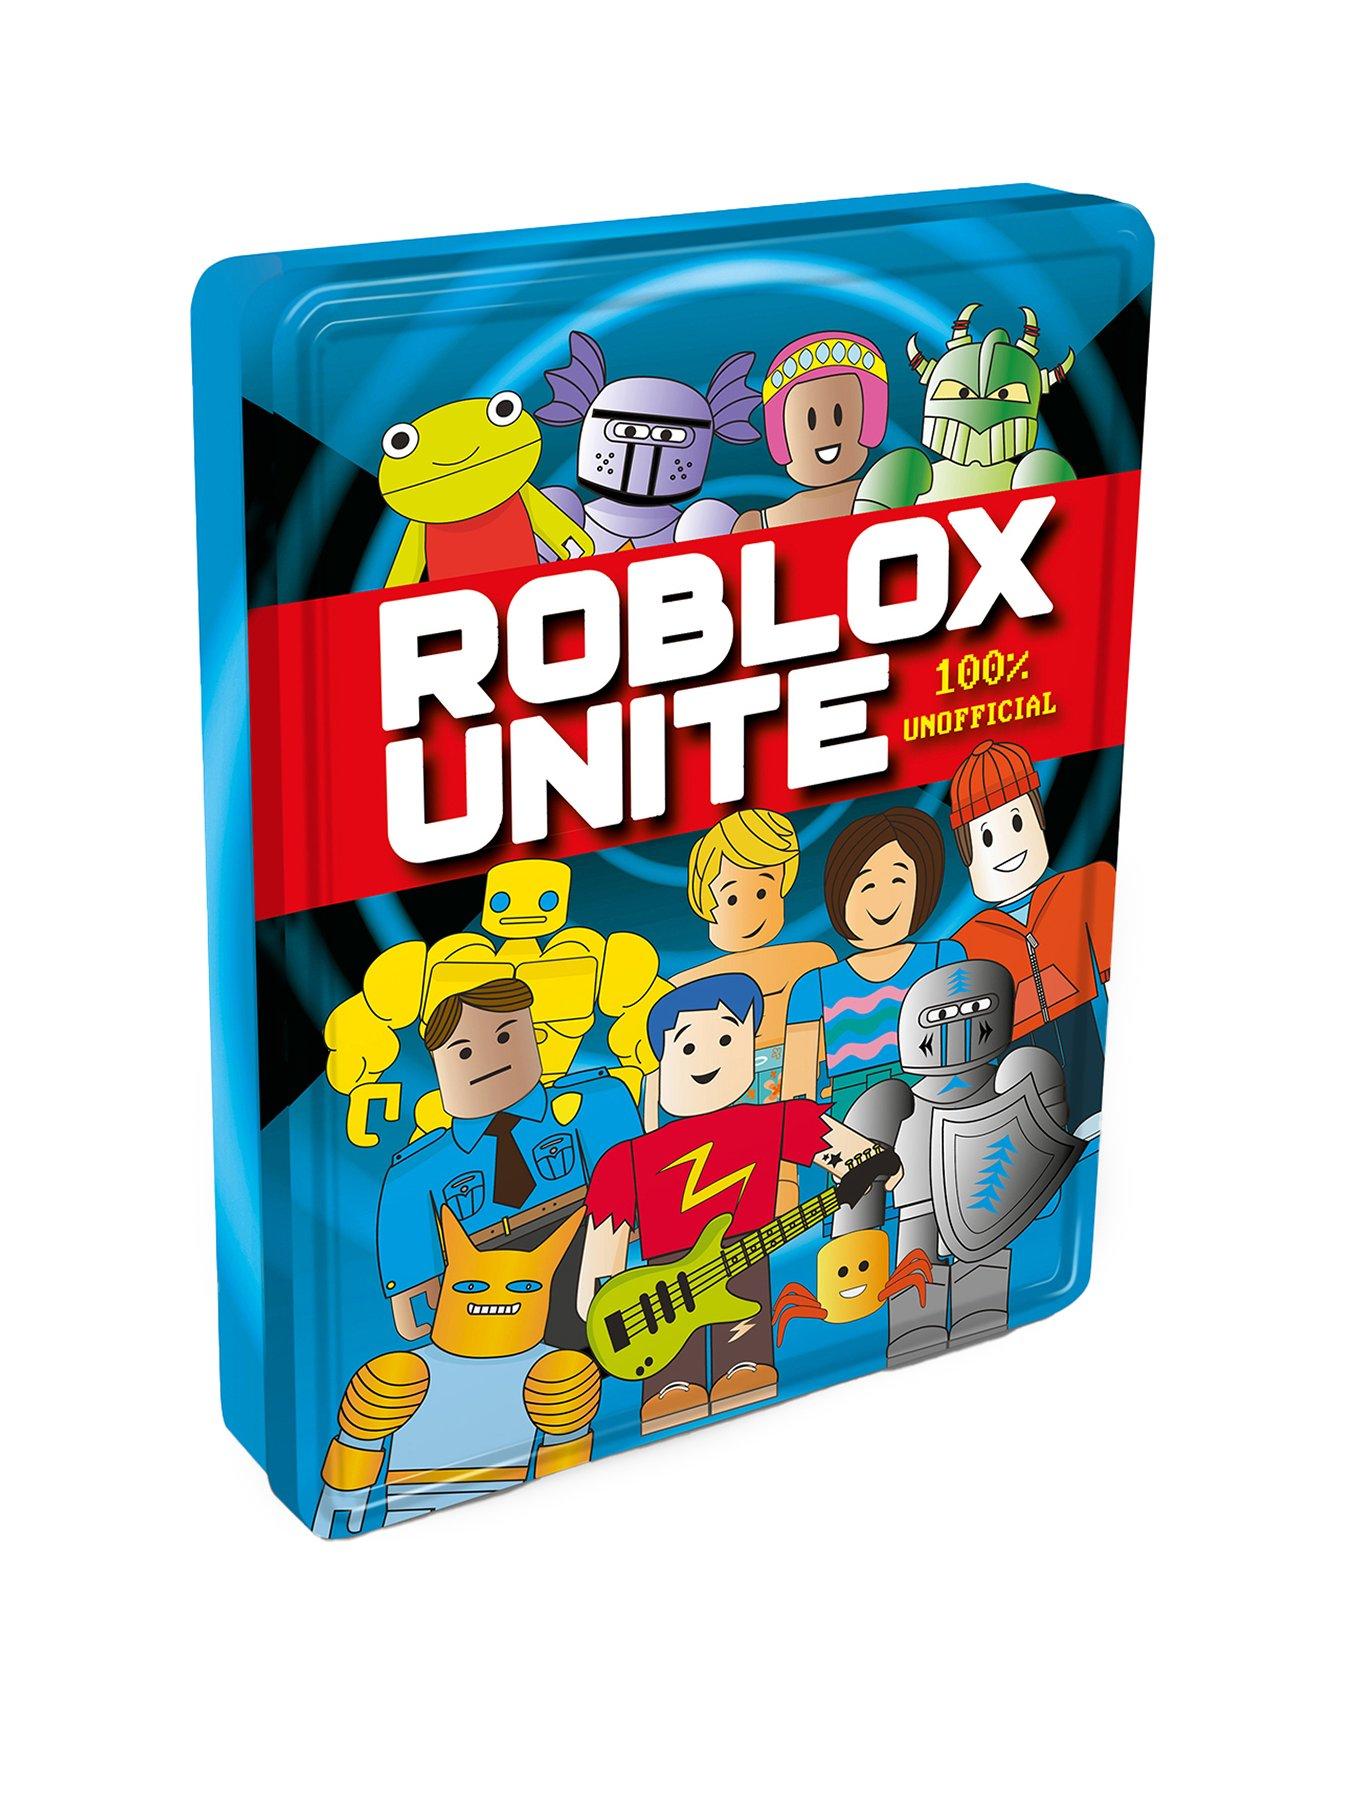 Roblox Xbox One Unofficial Game Guide on Apple Books